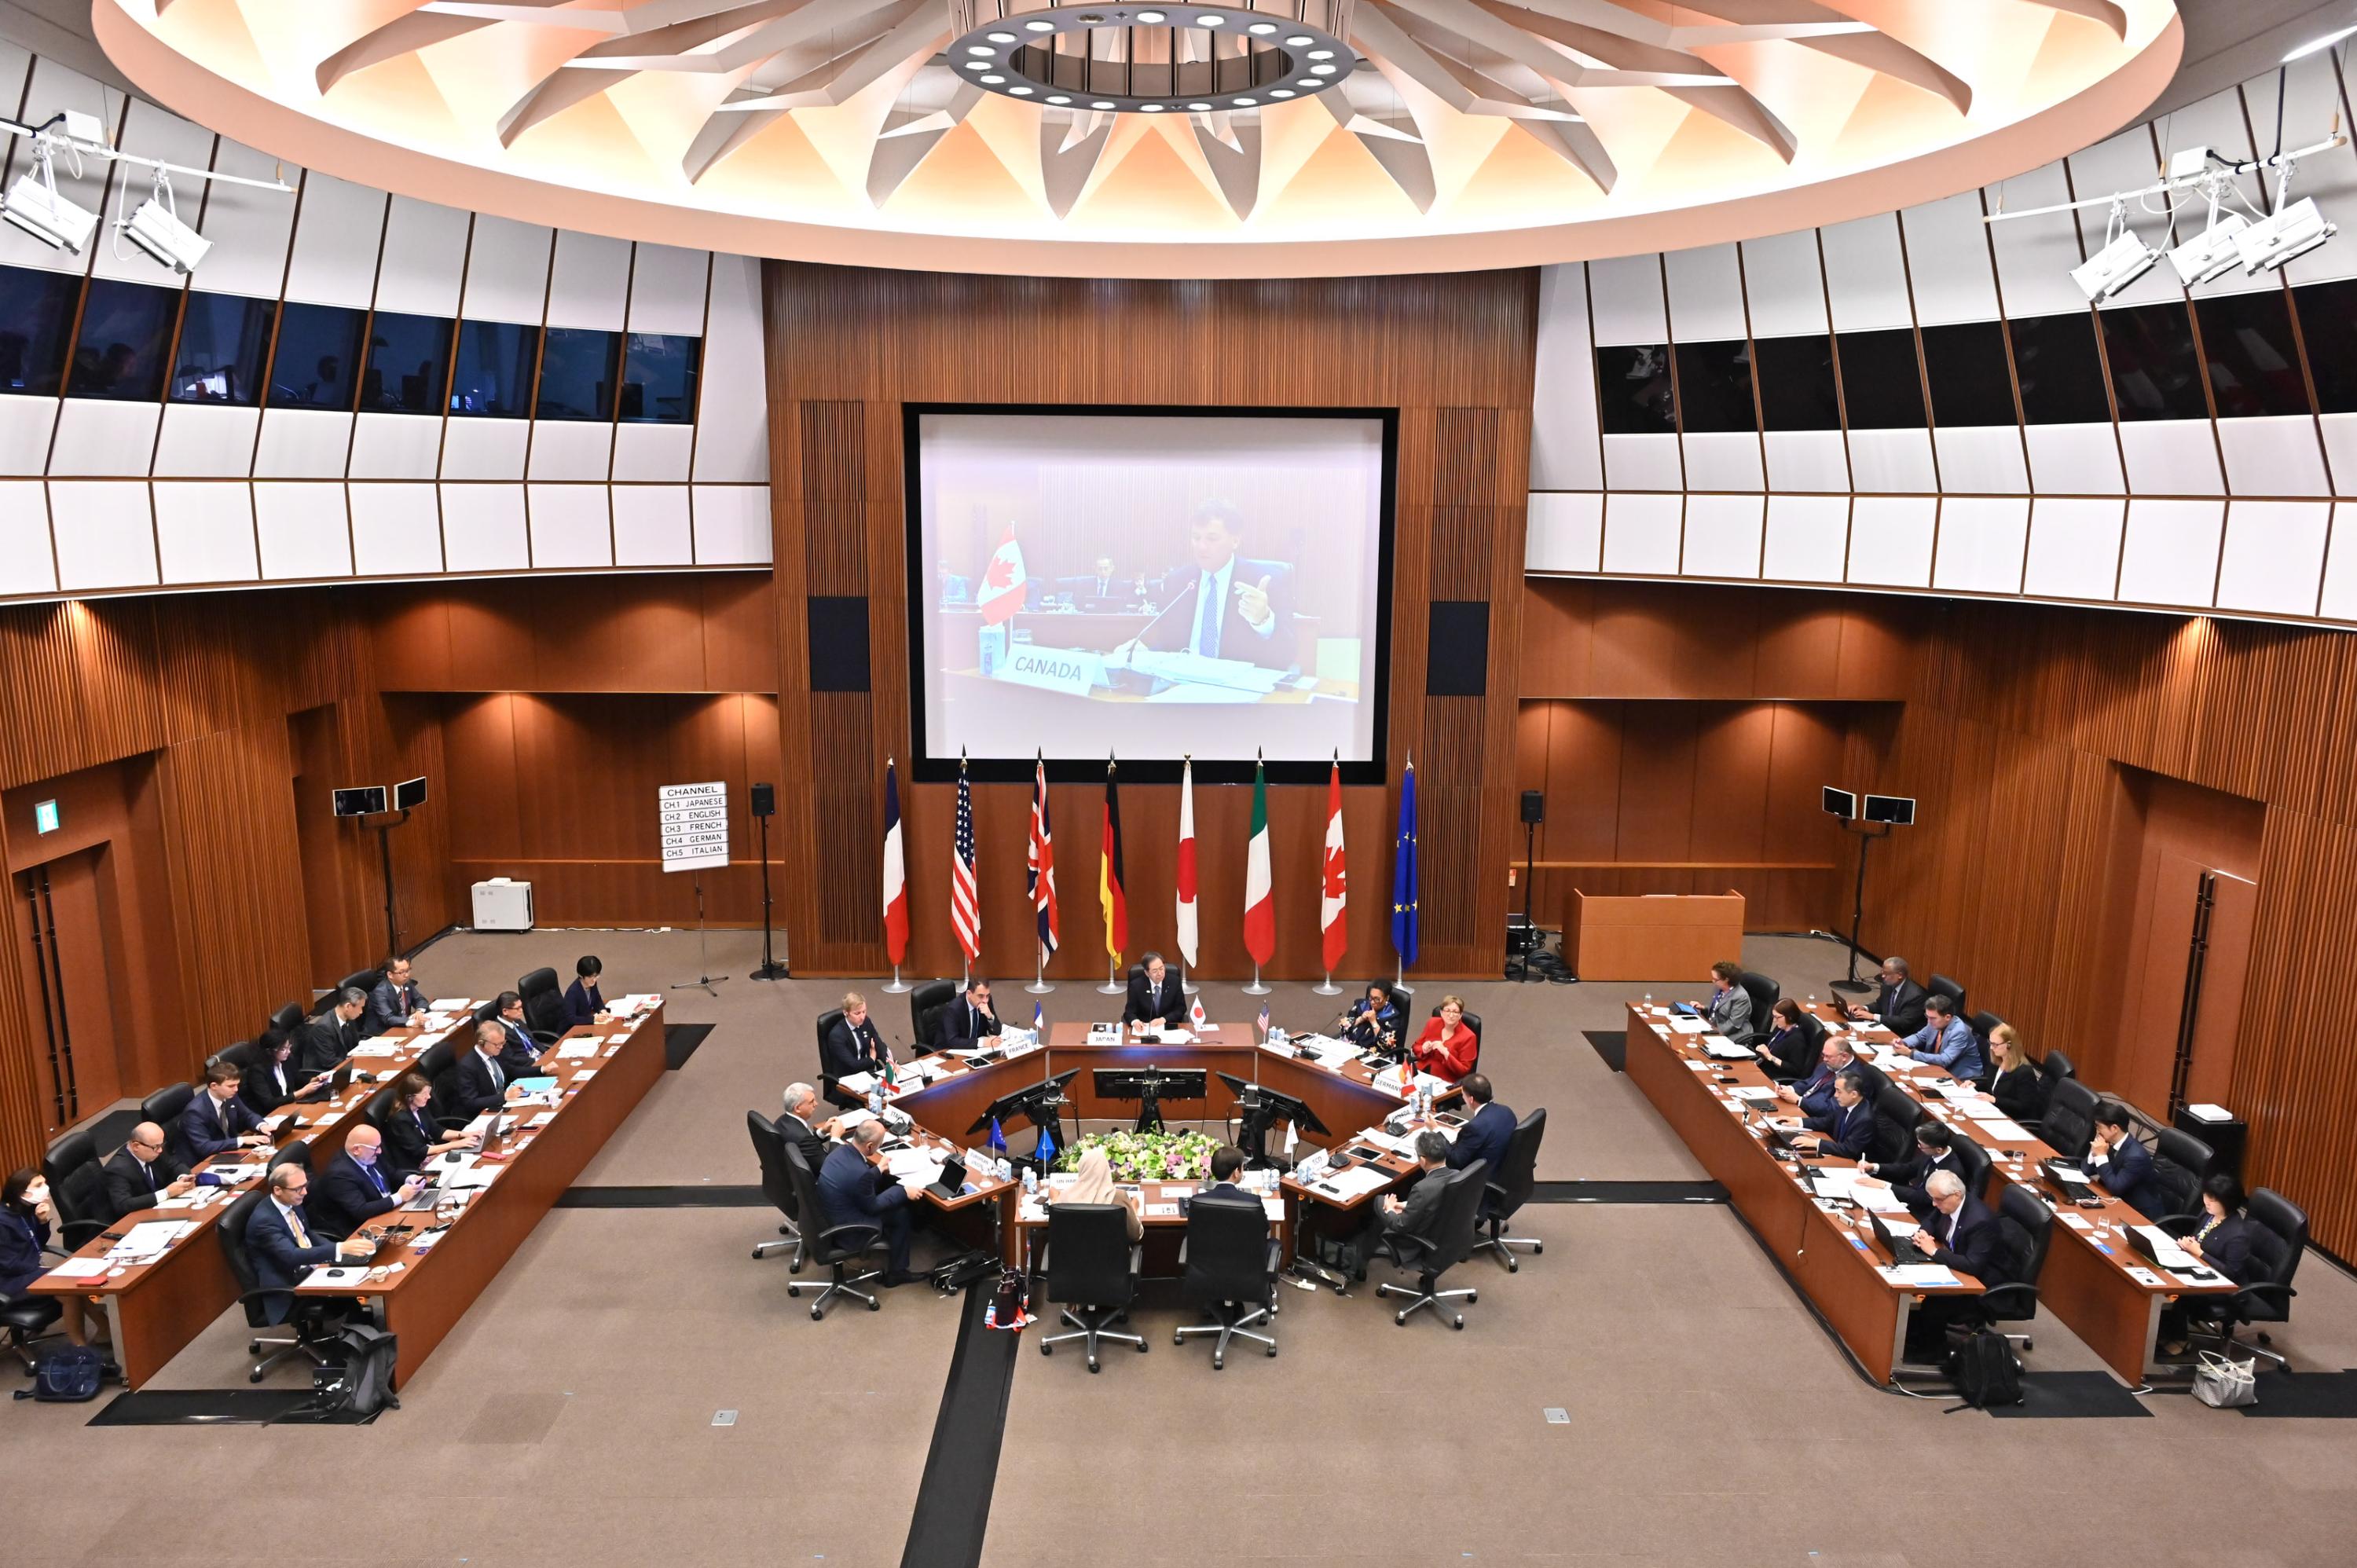 G7 Sustainable Urban Development Ministers’ Meeting.